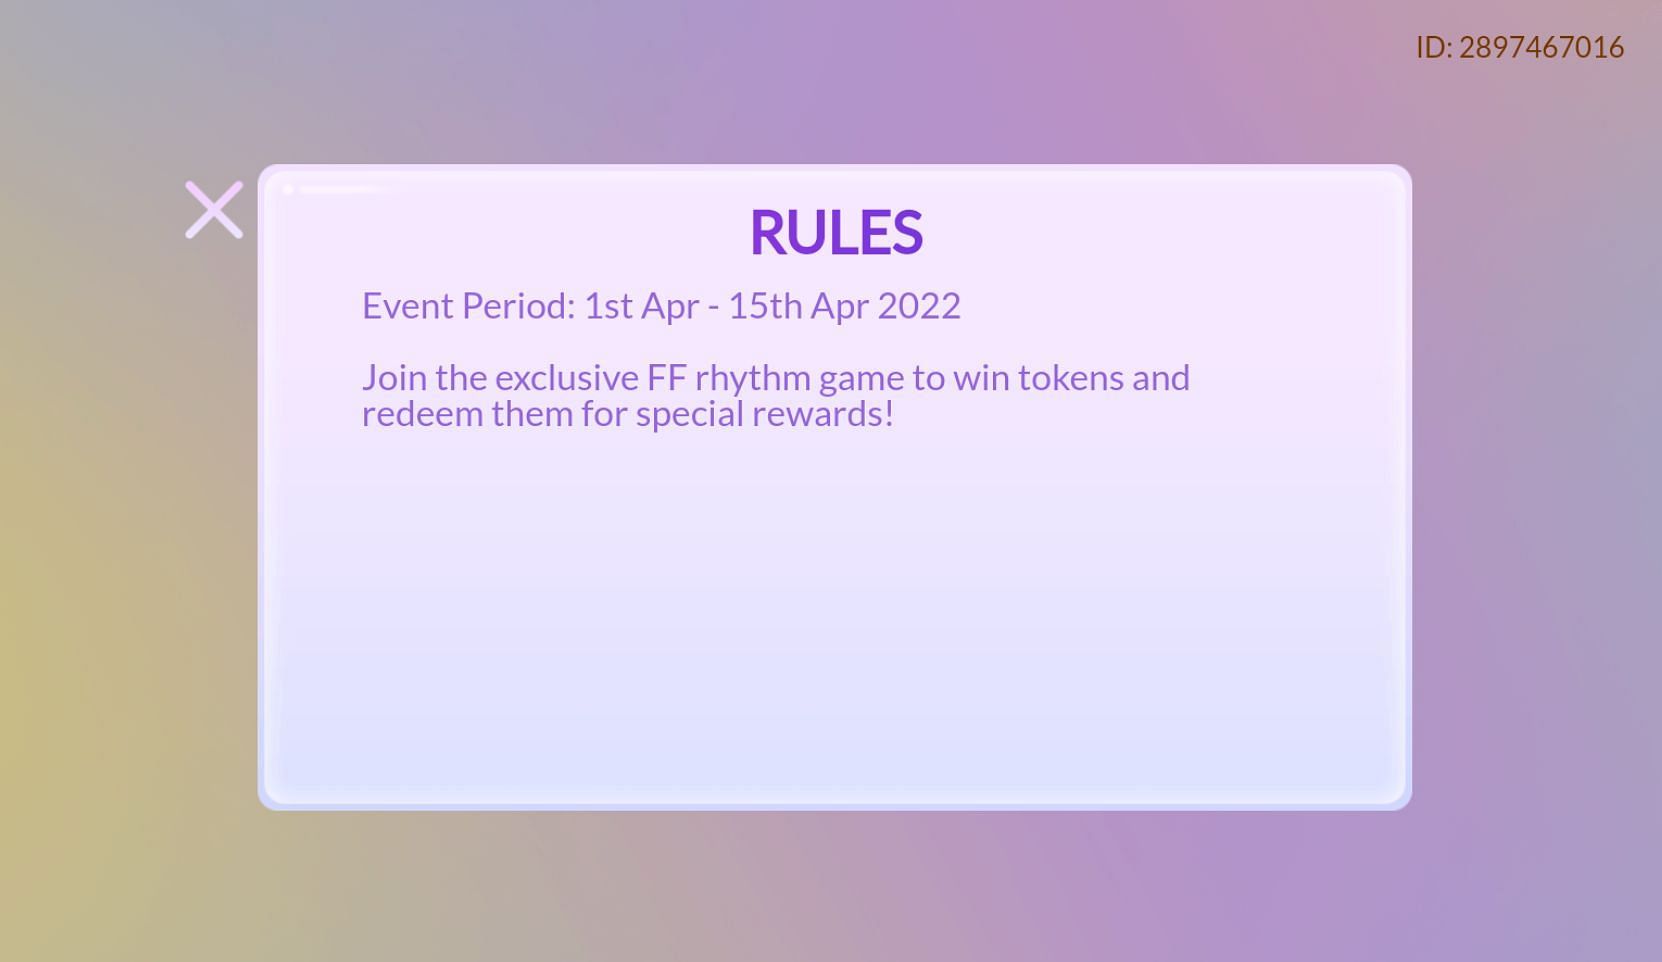 Rules of the event (Image via Garena)